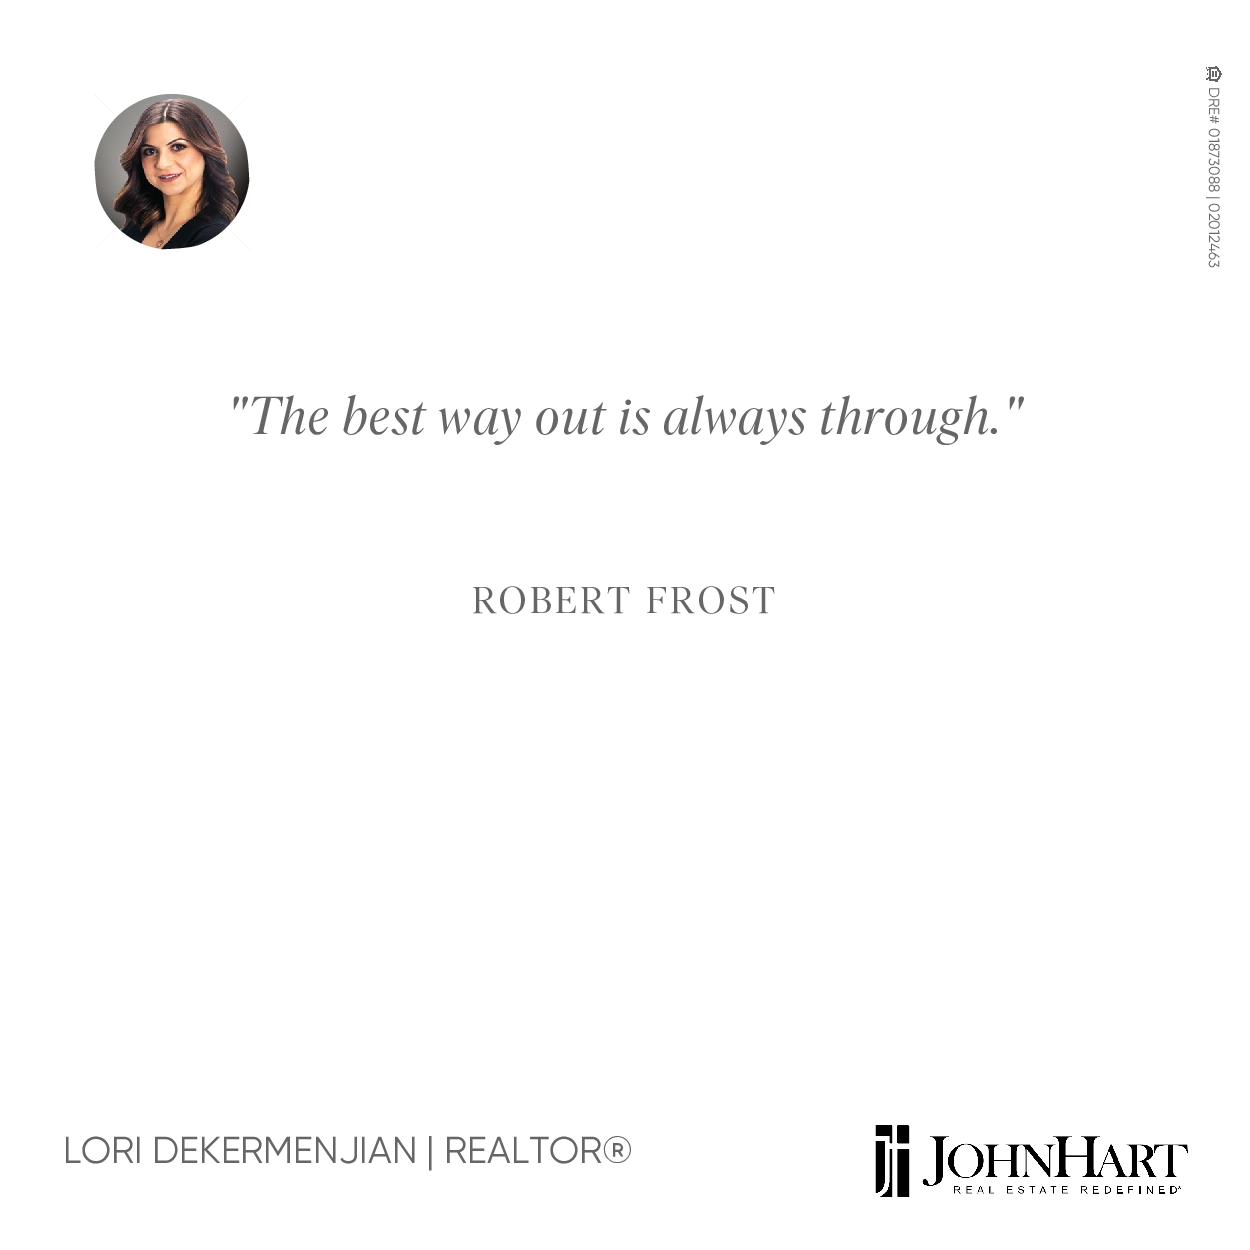 Featured image of Robert Frost